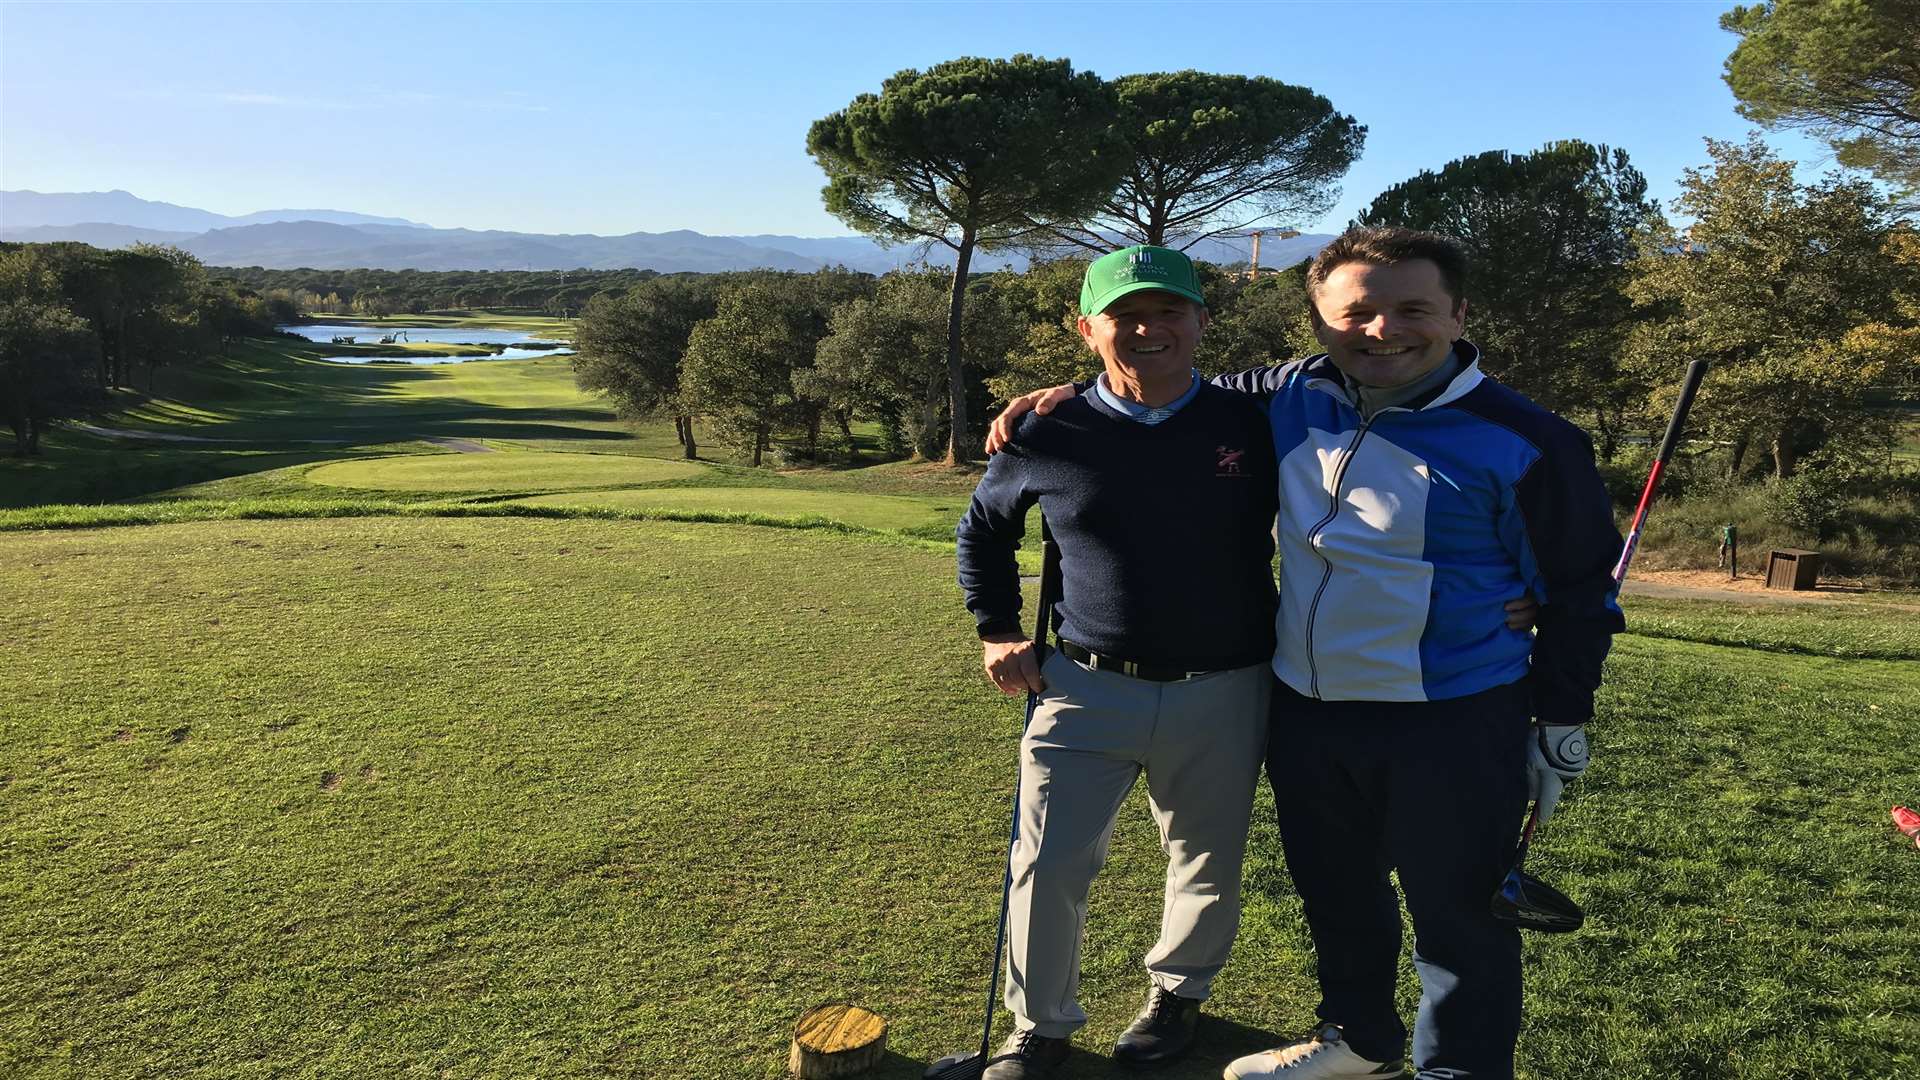 Jeff Fuidge and Chris Hollins on the 13th tee of The Stadium Course at PGA Catalunya